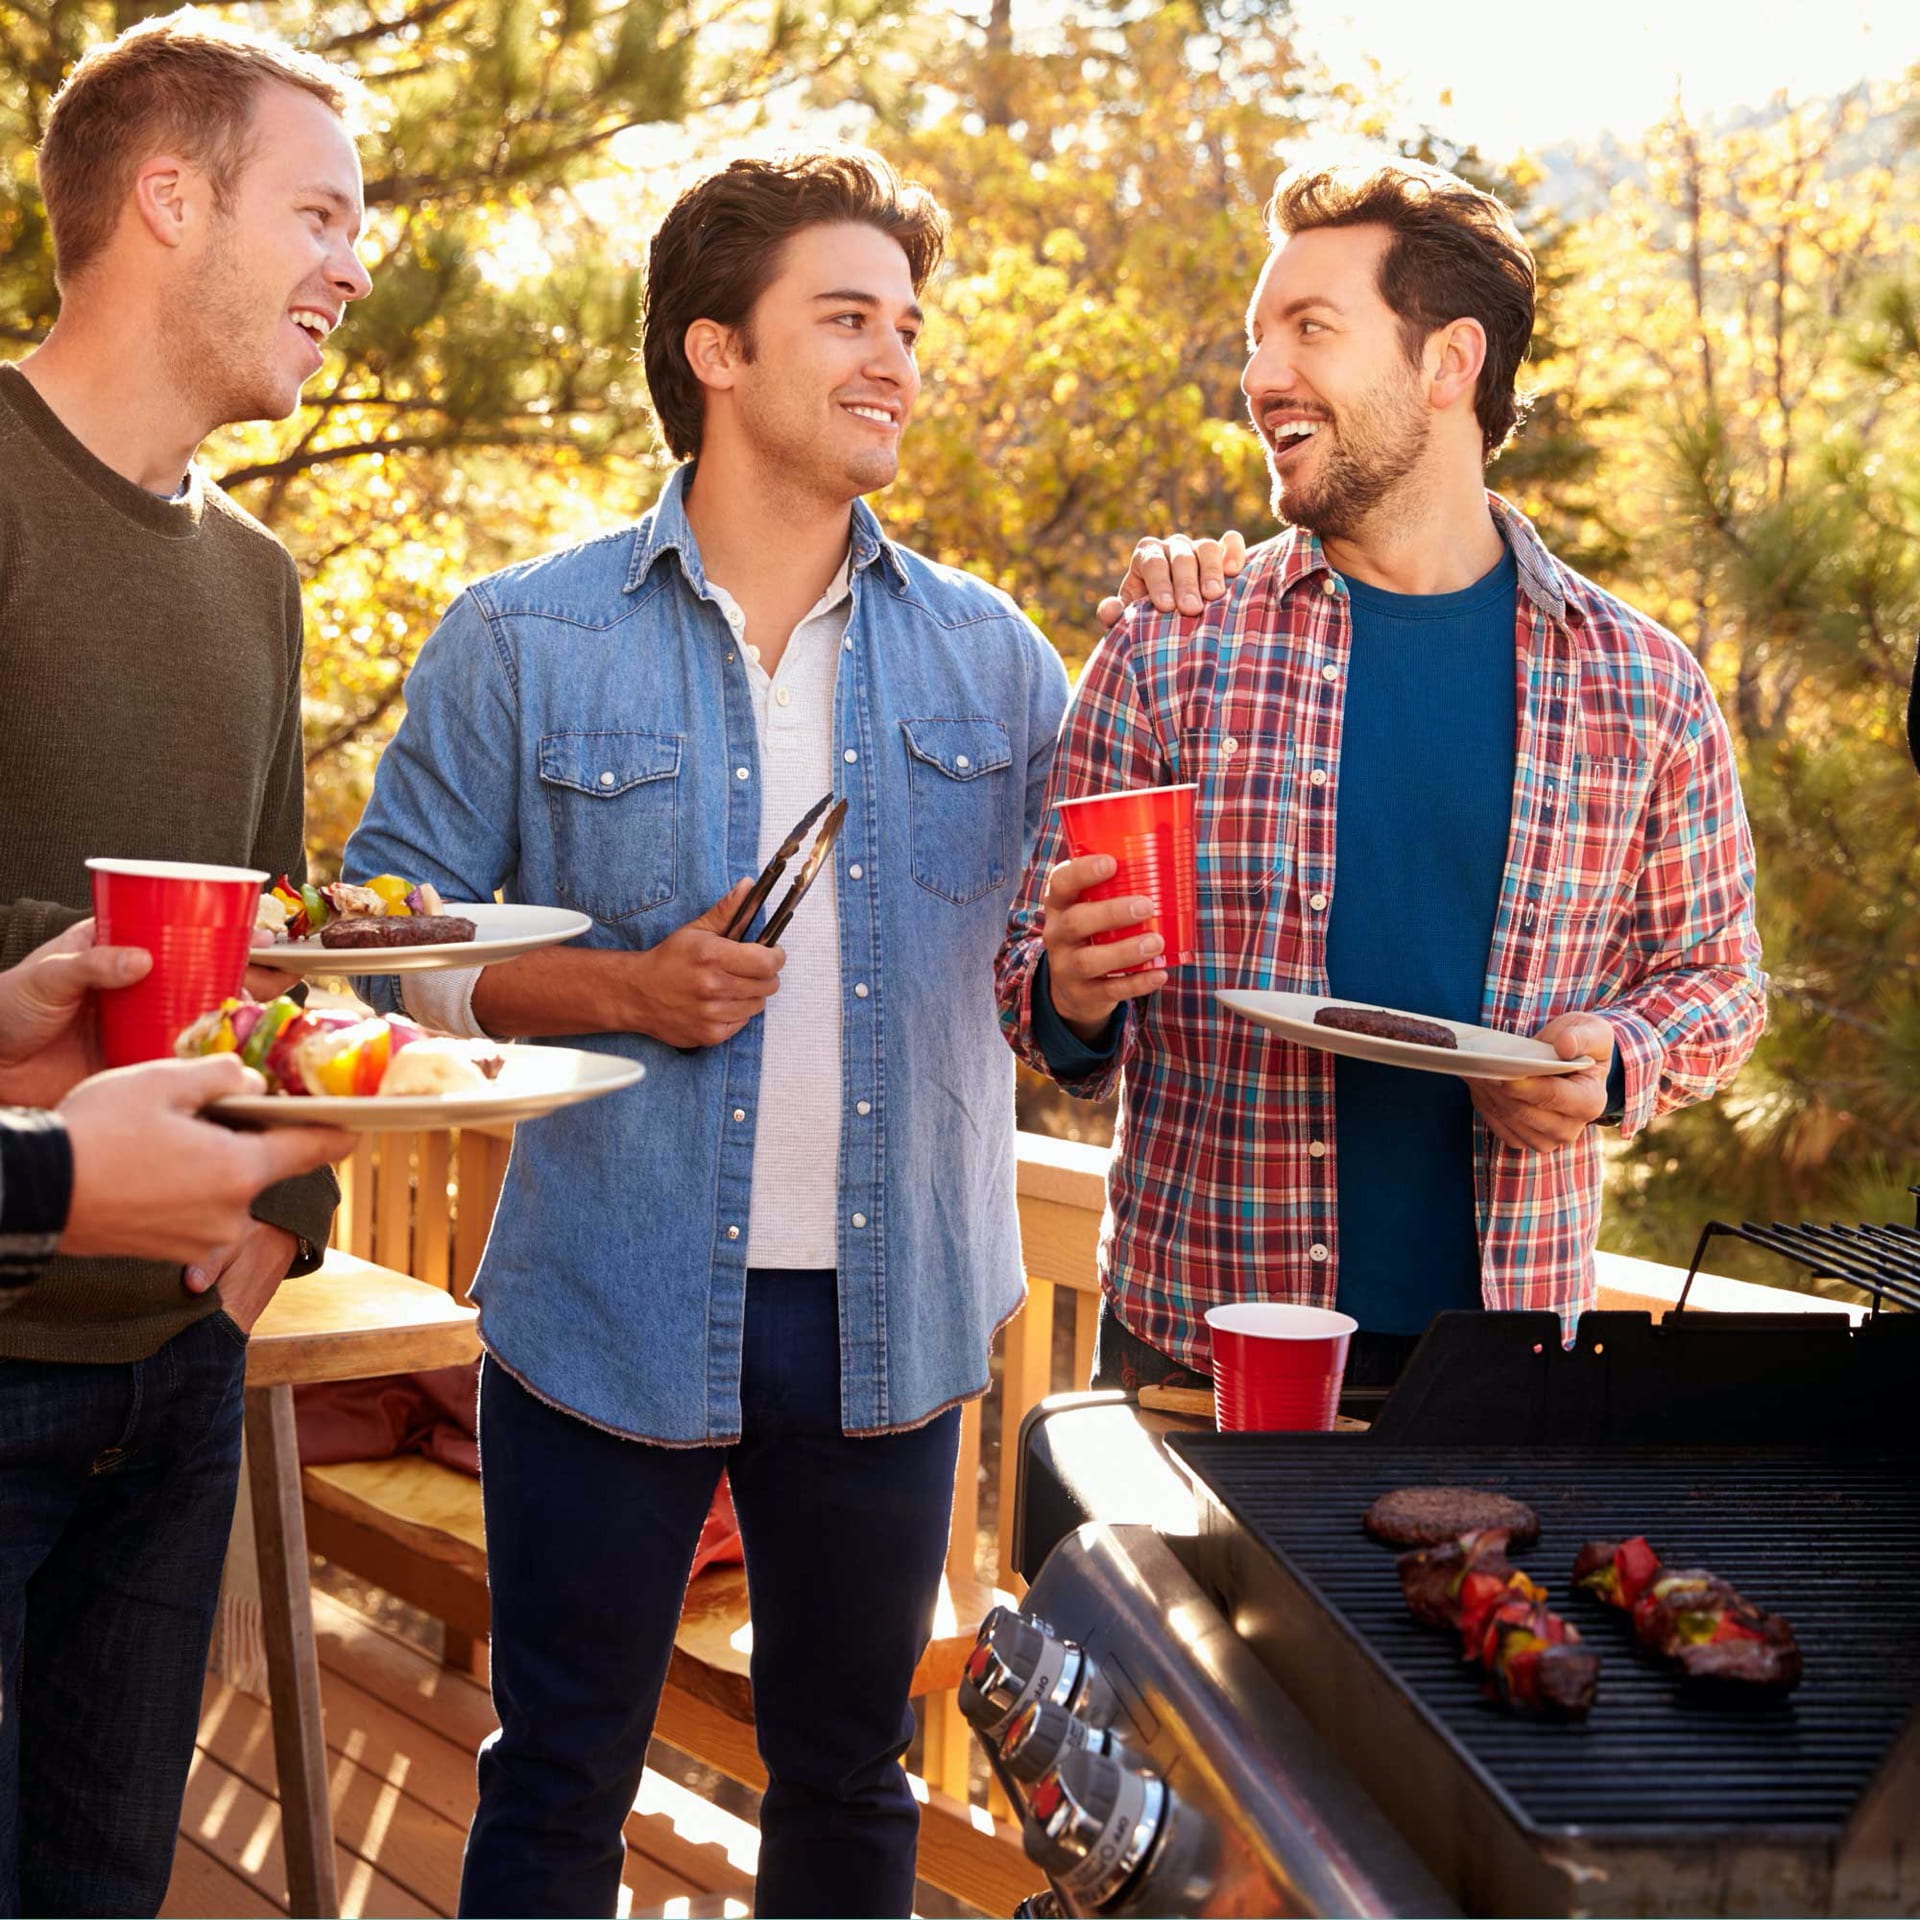 Group Of Gay Male Friends Enjoying Barbeque Together